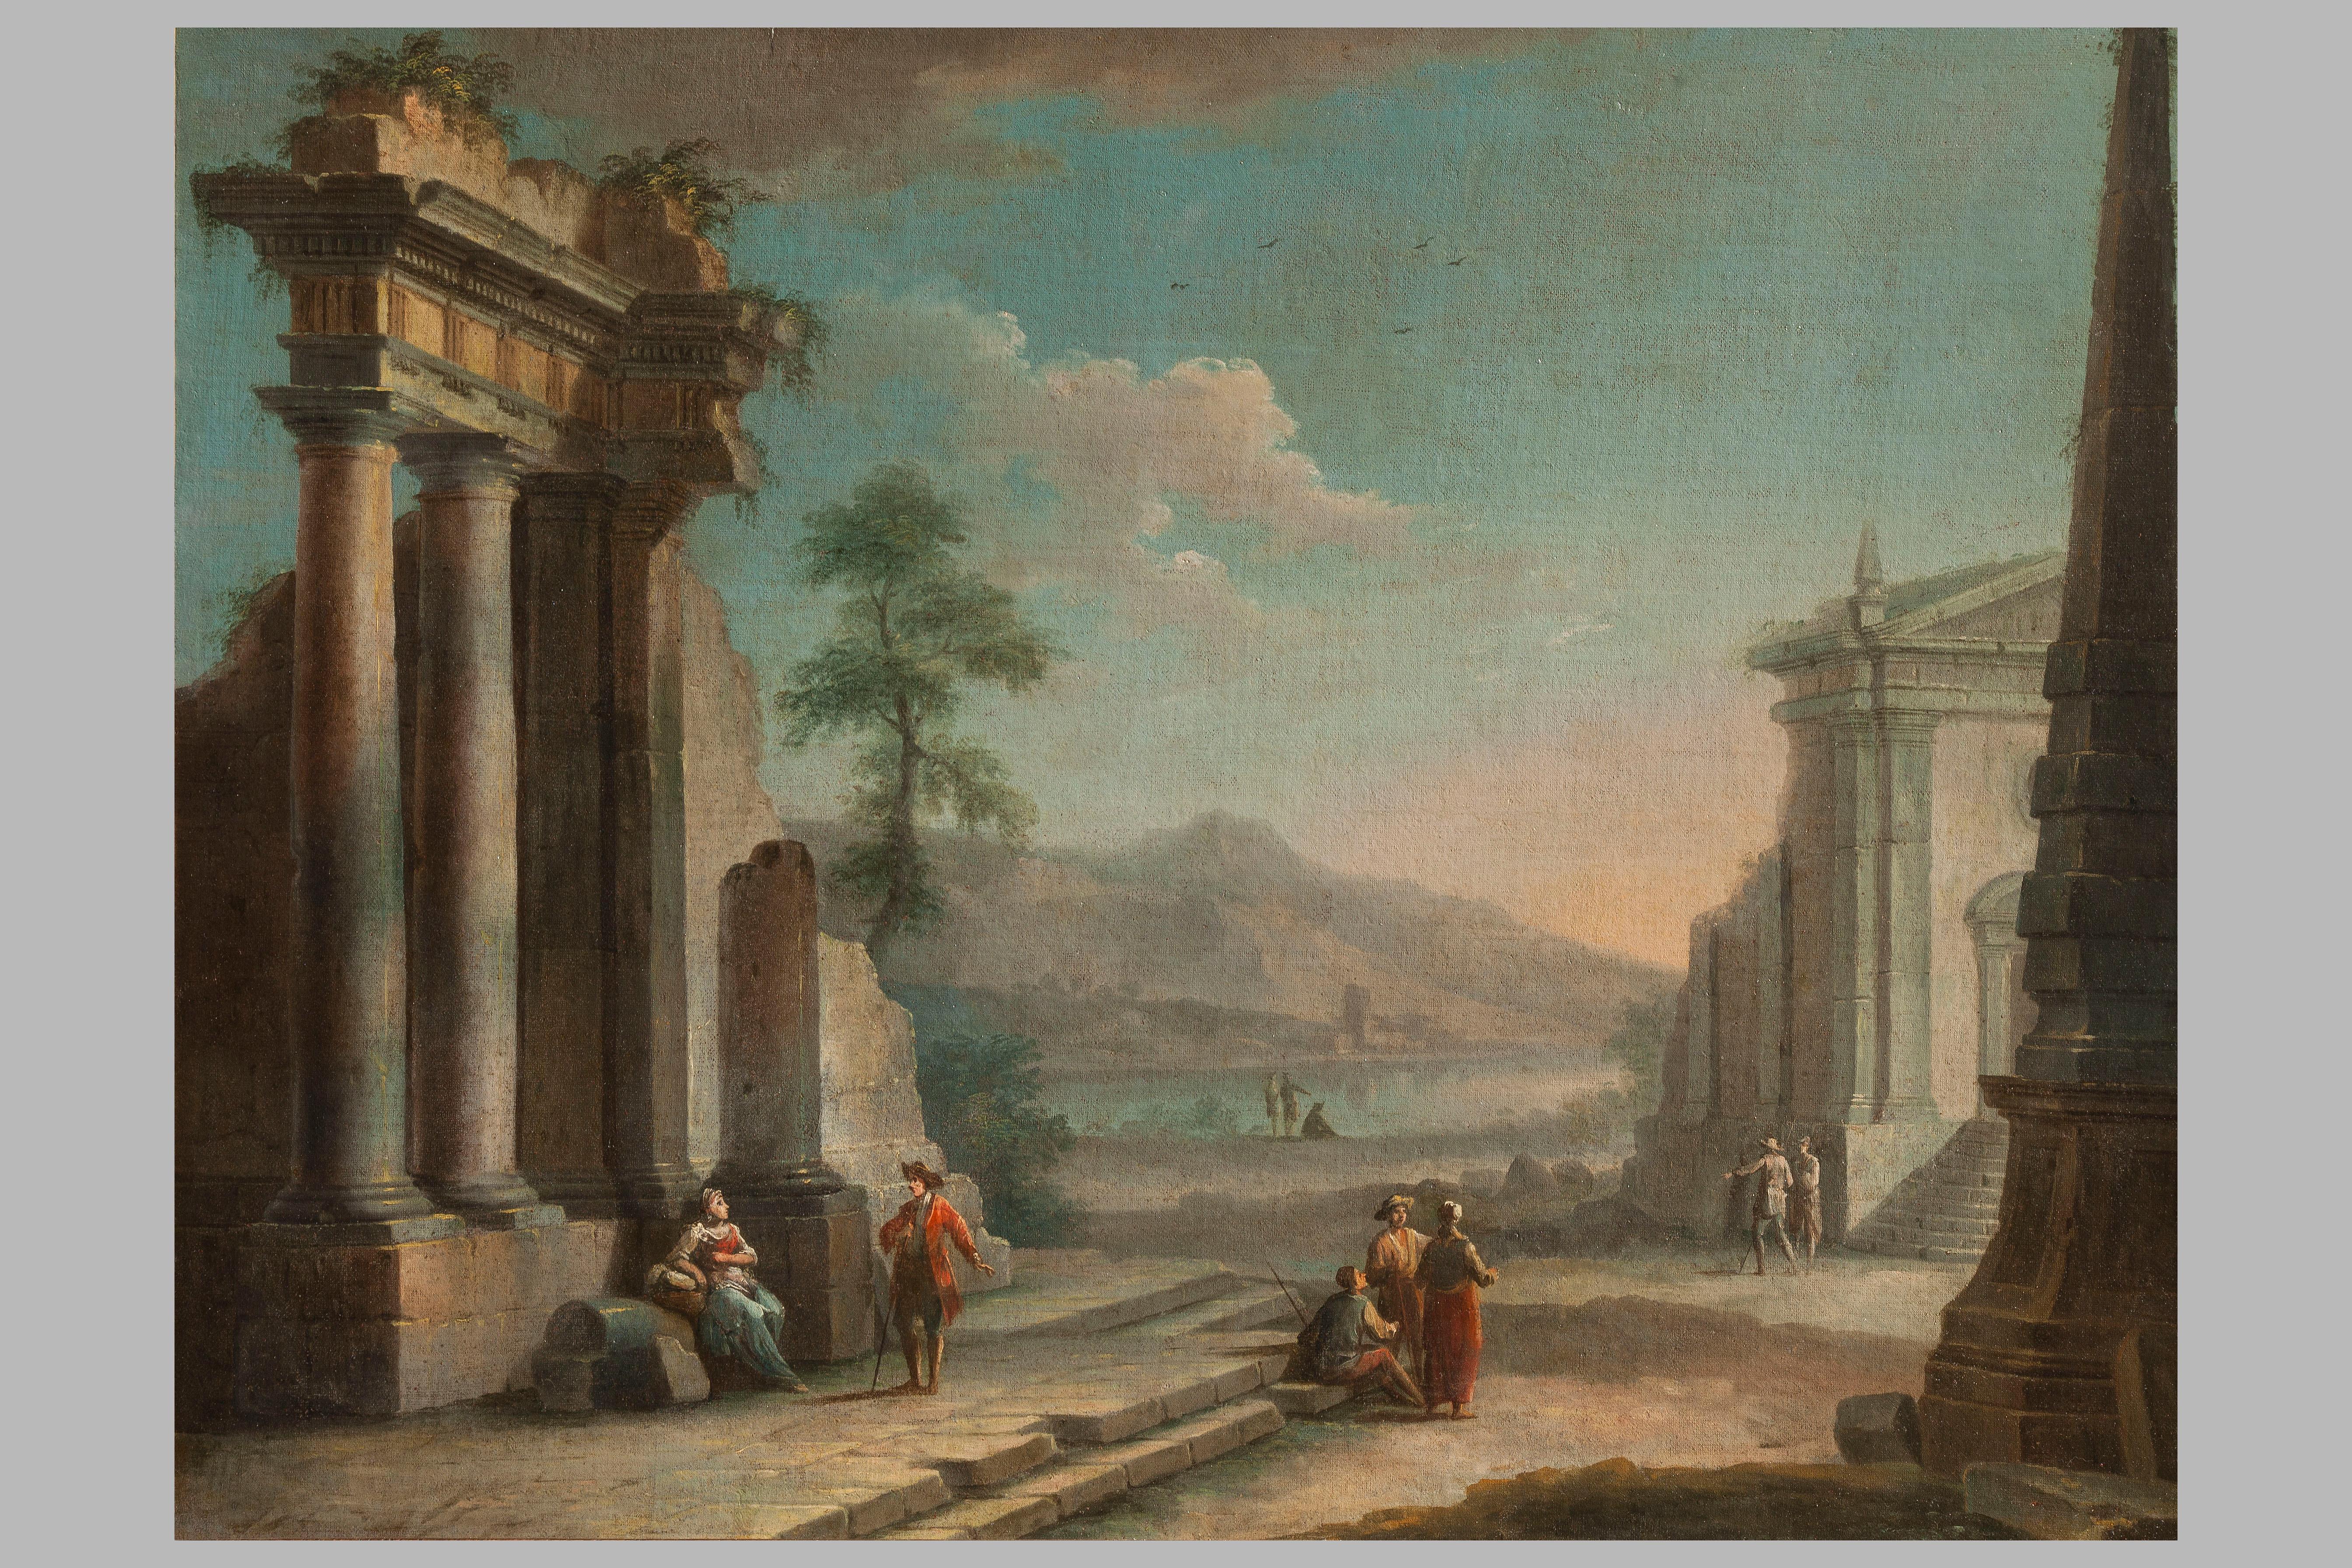 The price is intended for the couple of paintings.


Expertise by Prof. Giancarlo Sestieri.

This pair of paintings by Giovanni Domenico Gambone (Turin, 1720 – 1793) depicts an architectural capriccio with archaeological ruins and people who